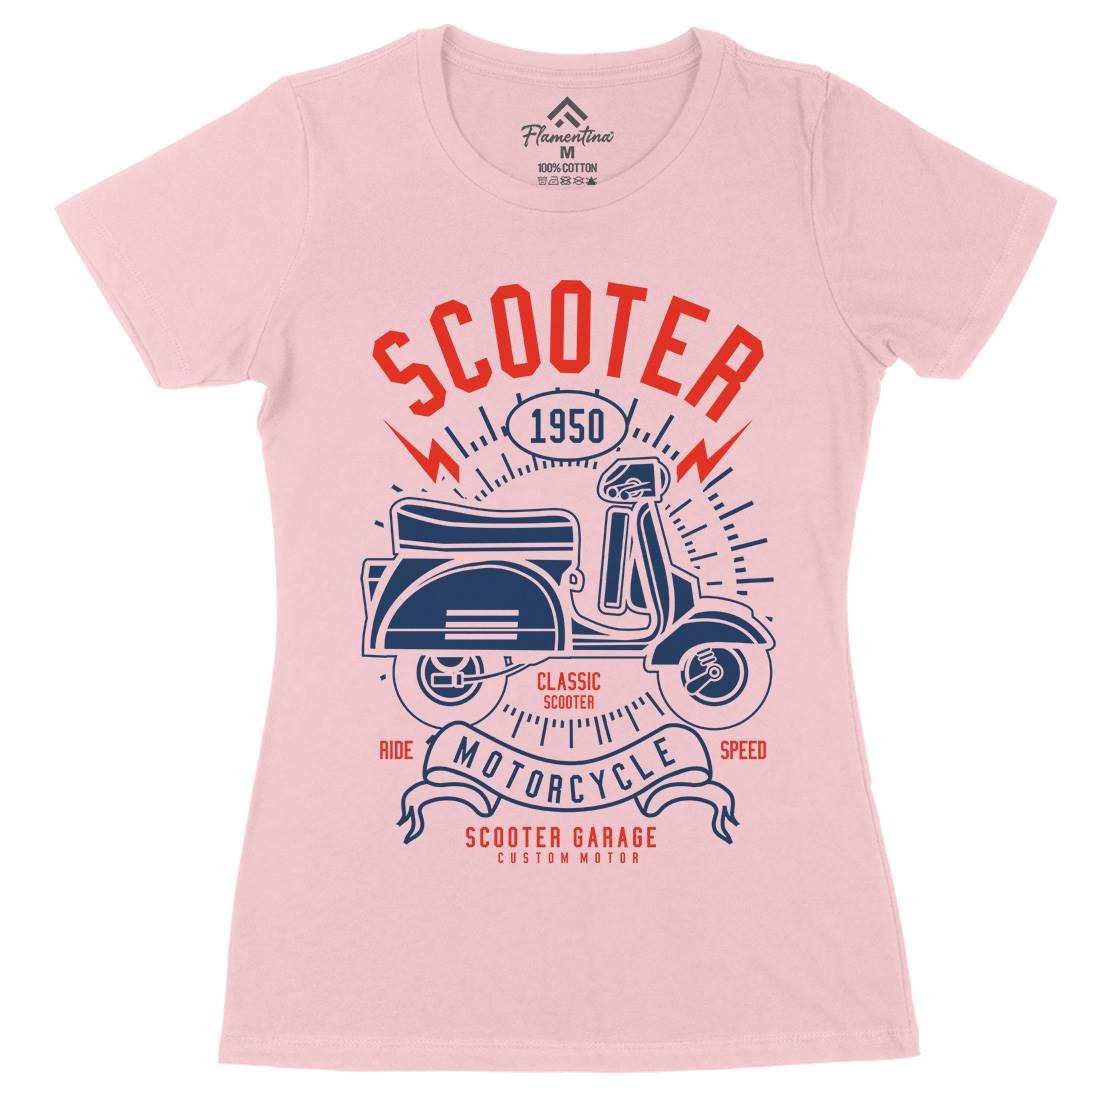 Scooter Womens Organic Crew Neck T-Shirt Motorcycles A276